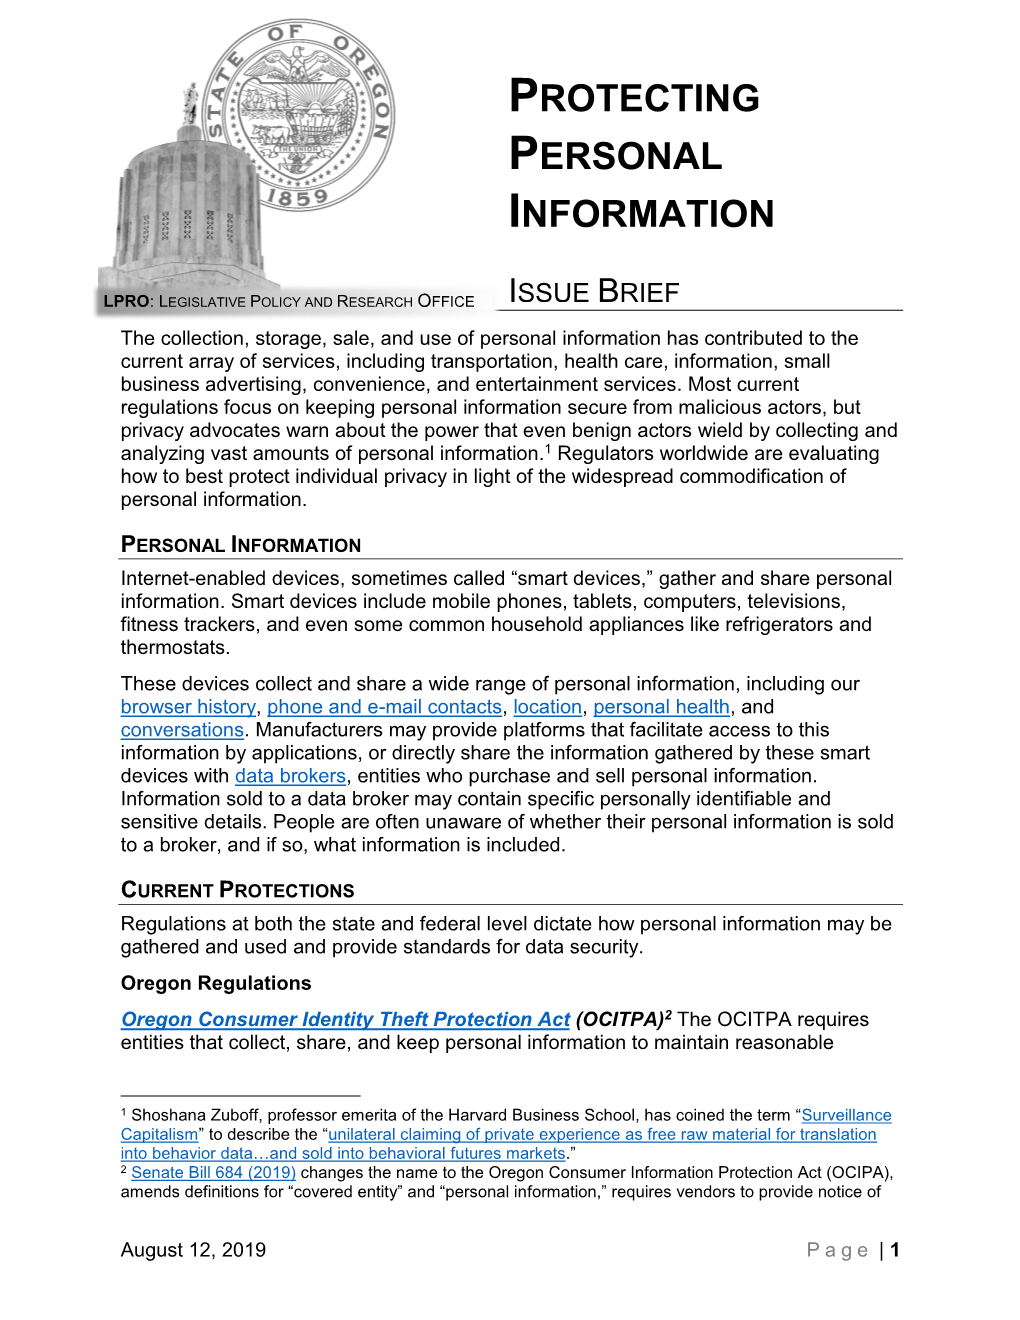 ISSUE BRIEF OFFICE Safeguards to Ensure the Security, Confidentiality, and Integrity of Personal Information